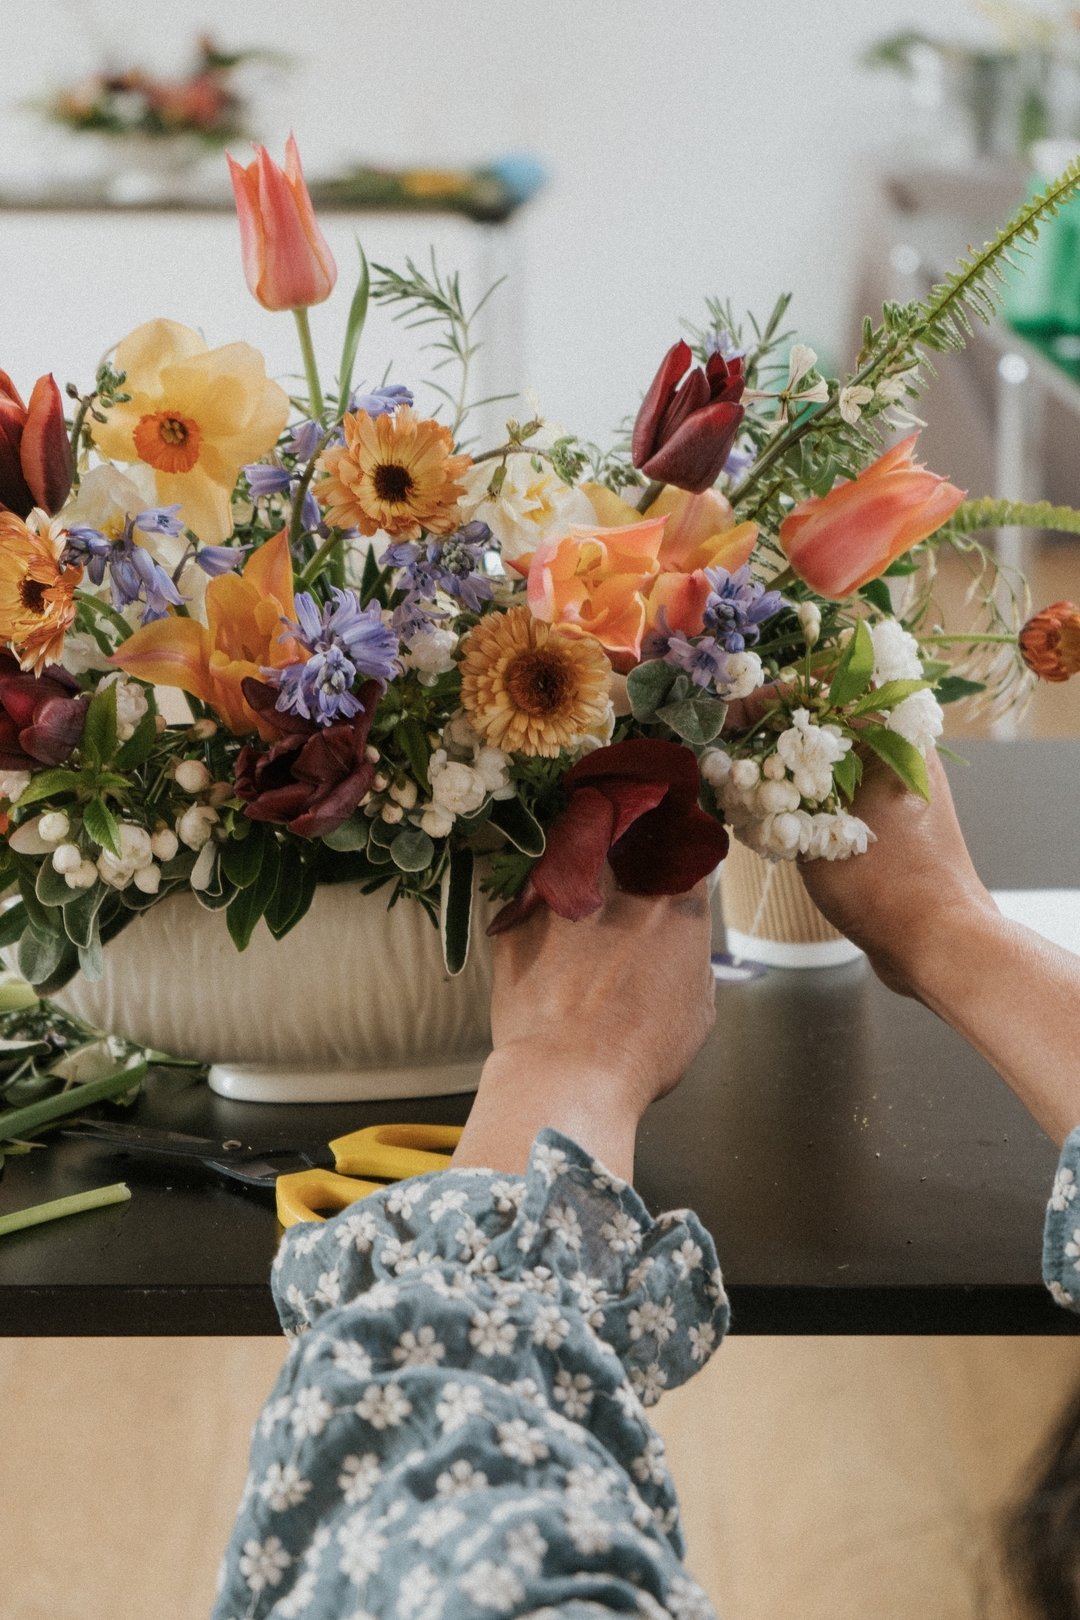 We love seeing busy hands at work. Make sure you tag us in your images, we love anything from BTS to styled shoots - we love seeing you work and what you're creating! Lovely capture from member/employer @strengthandstem